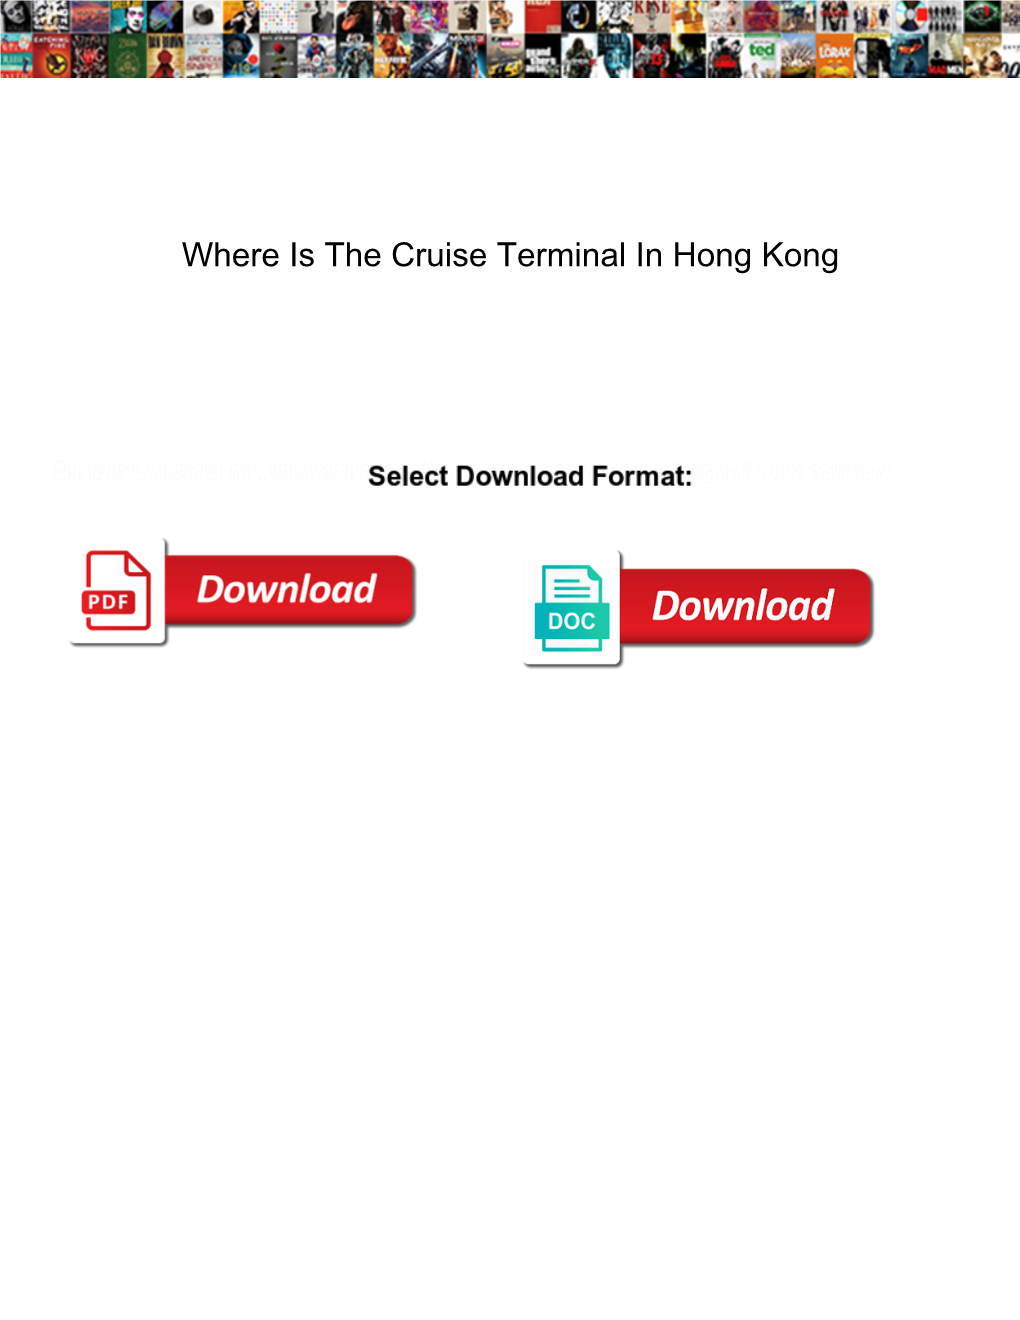 Where Is the Cruise Terminal in Hong Kong